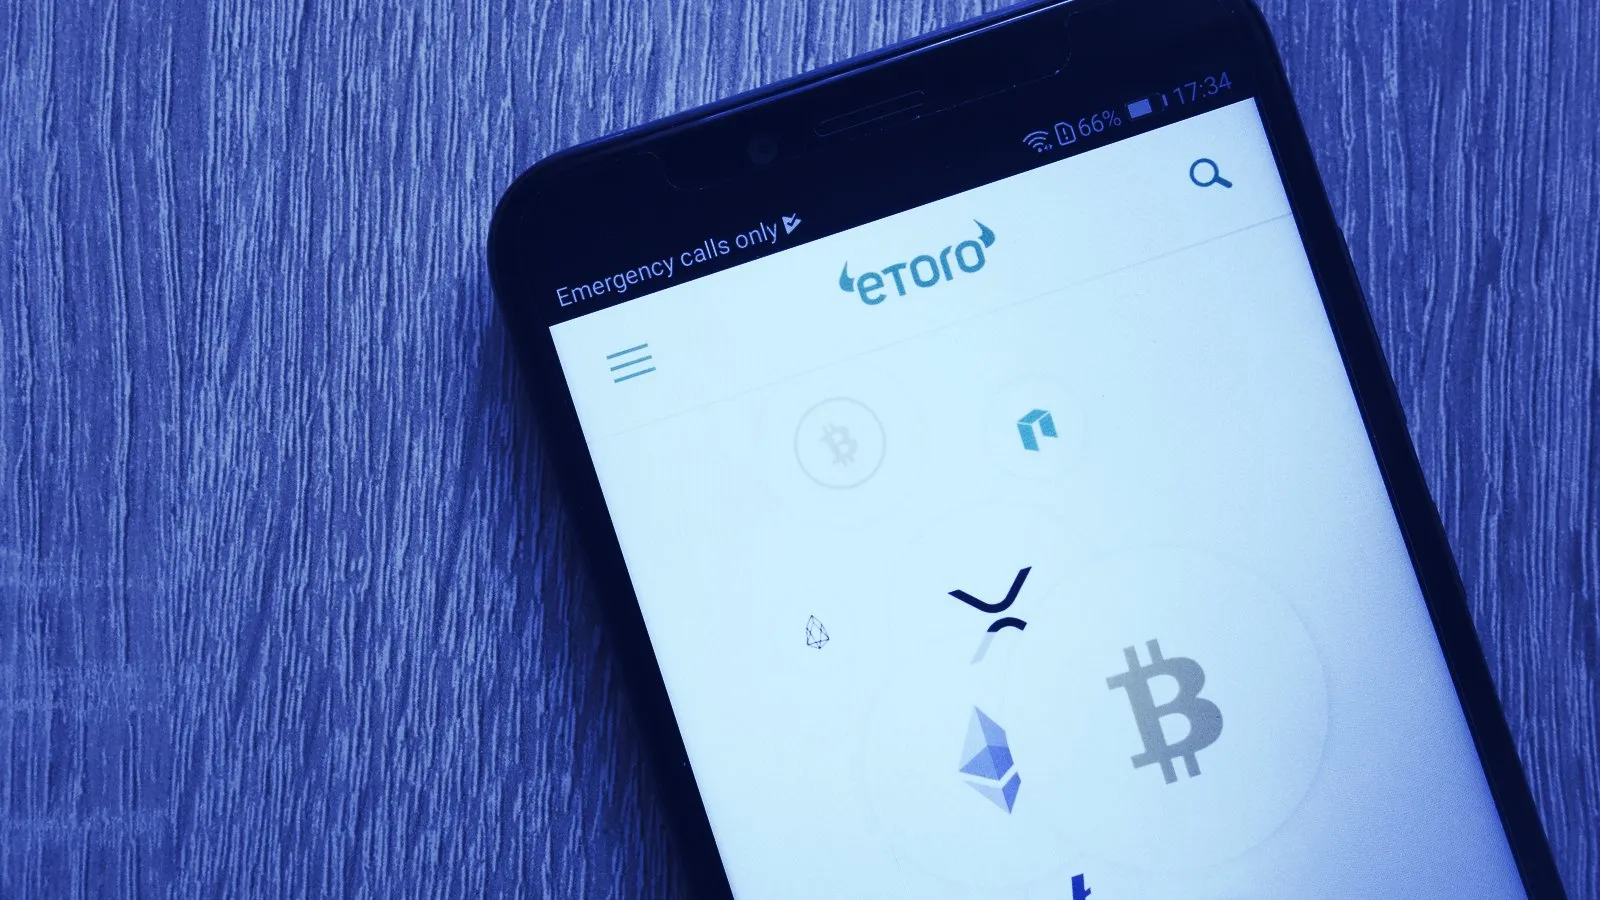 eToro has suspended trading for XPR due to the lawsuit against Ripple Labs. Image: Shutterstock